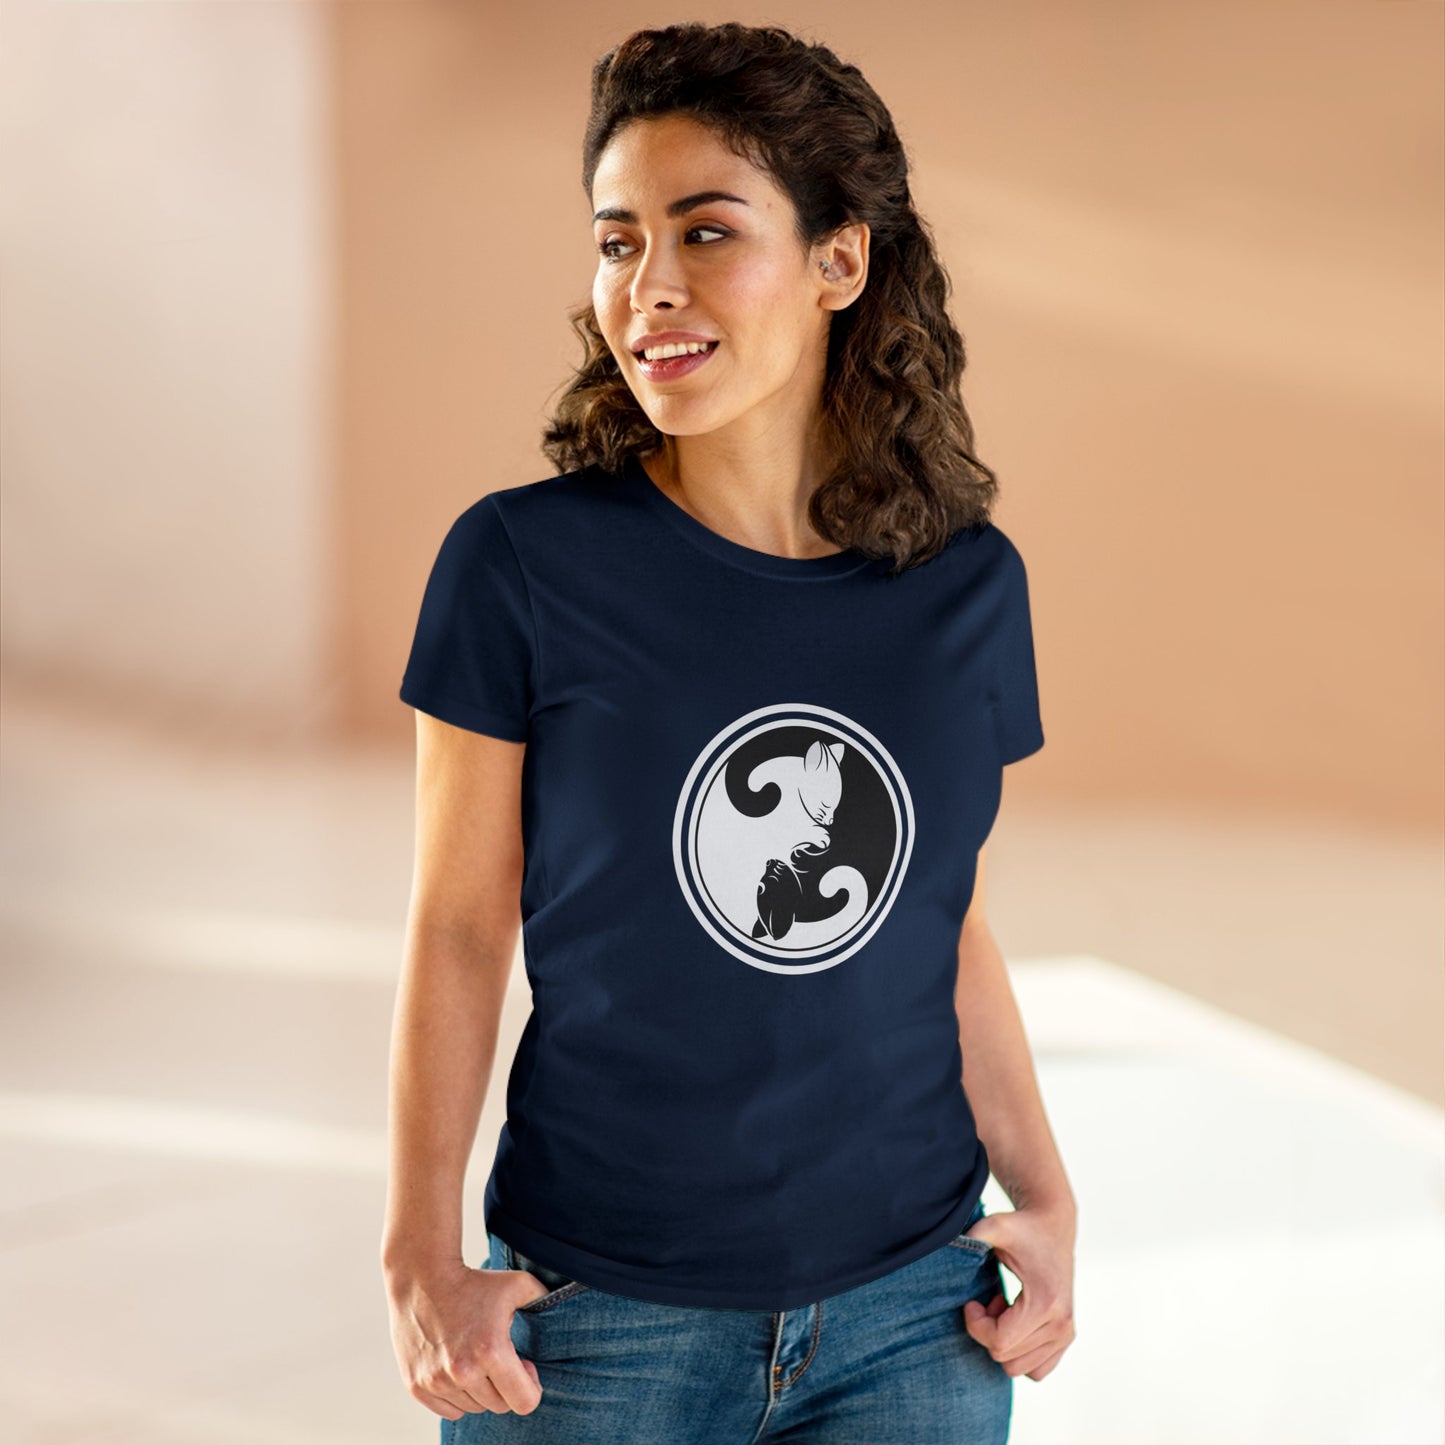 Symbol, Ying Yang, Cat- Adult, Semi-fitted, Smaller Size Image, T-shirt